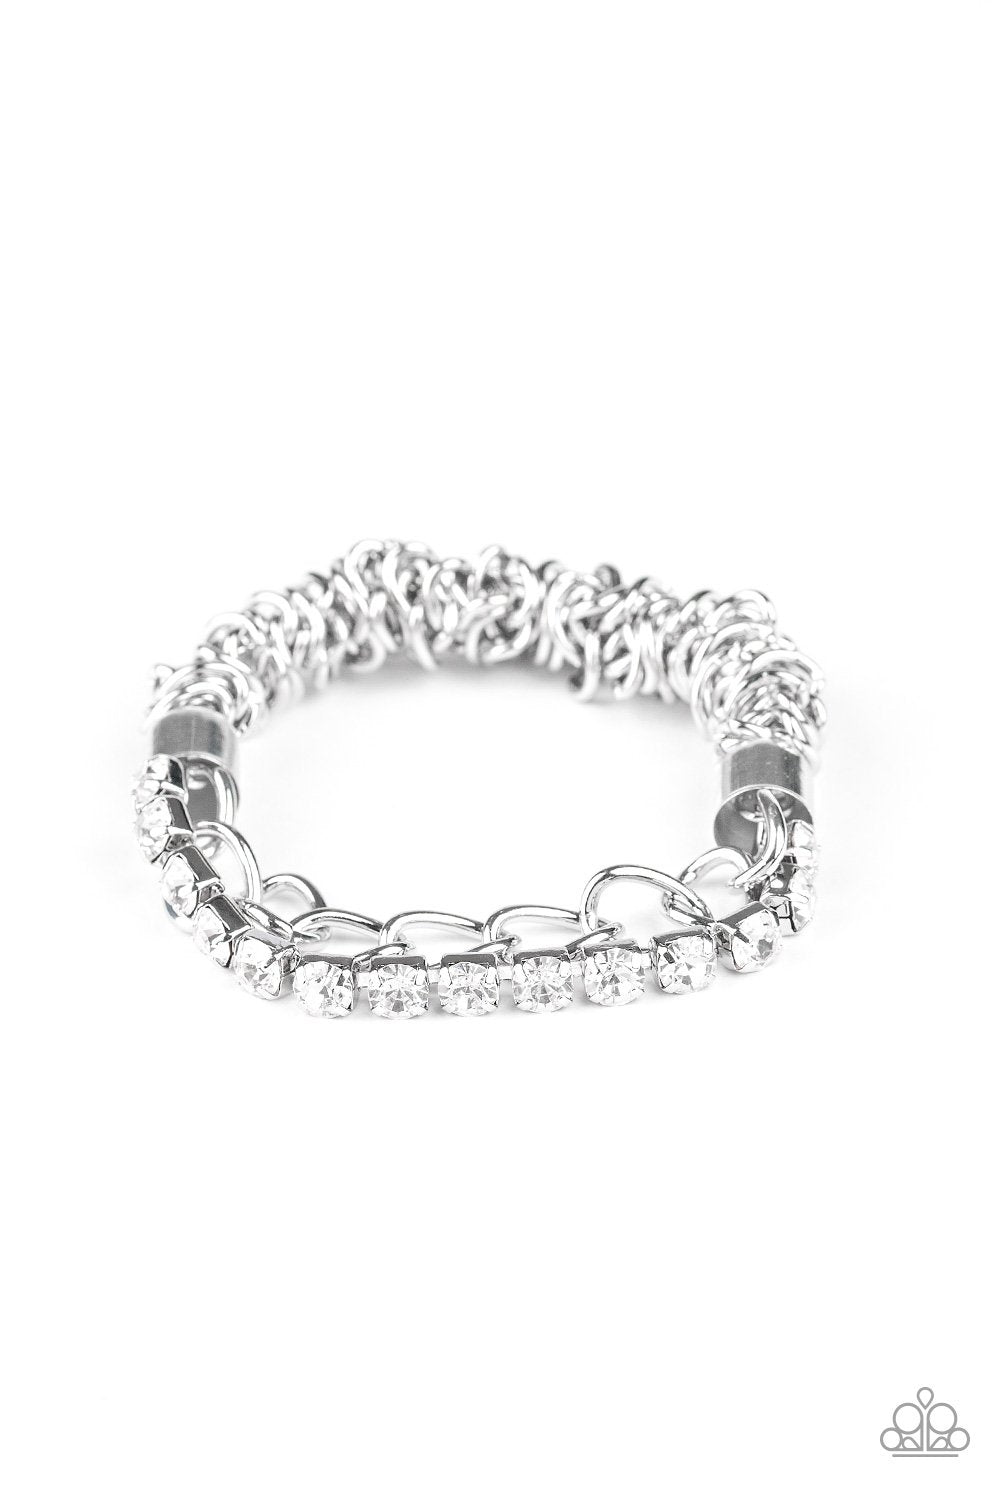 Glamour Grid White Rhinestone and Silver Chain Bracelet - Paparazzi Accessories-CarasShop.com - $5 Jewelry by Cara Jewels